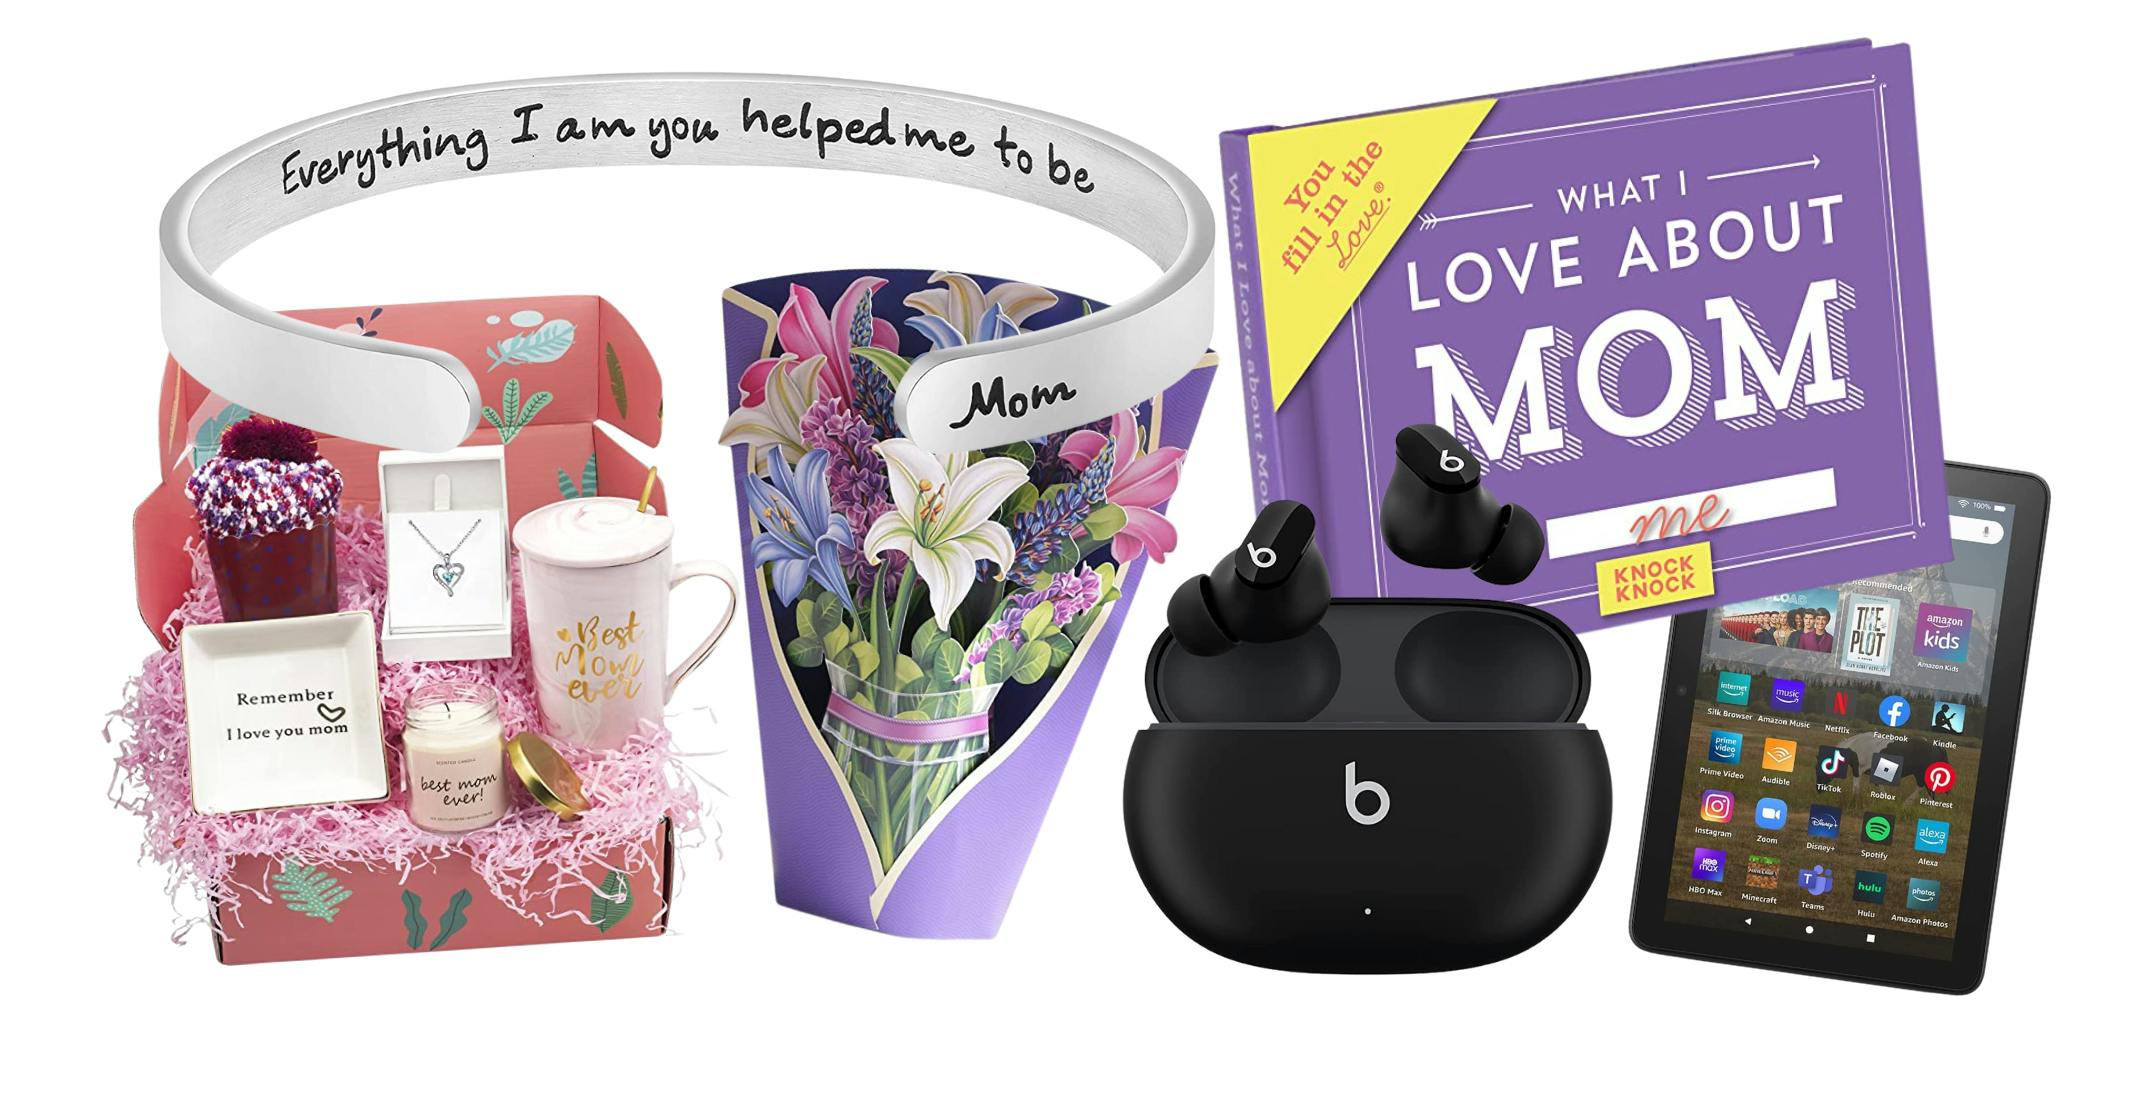 Mother's Day Is Coming Up! Here Are Budget-Friendly Amazon Gifts for Mom